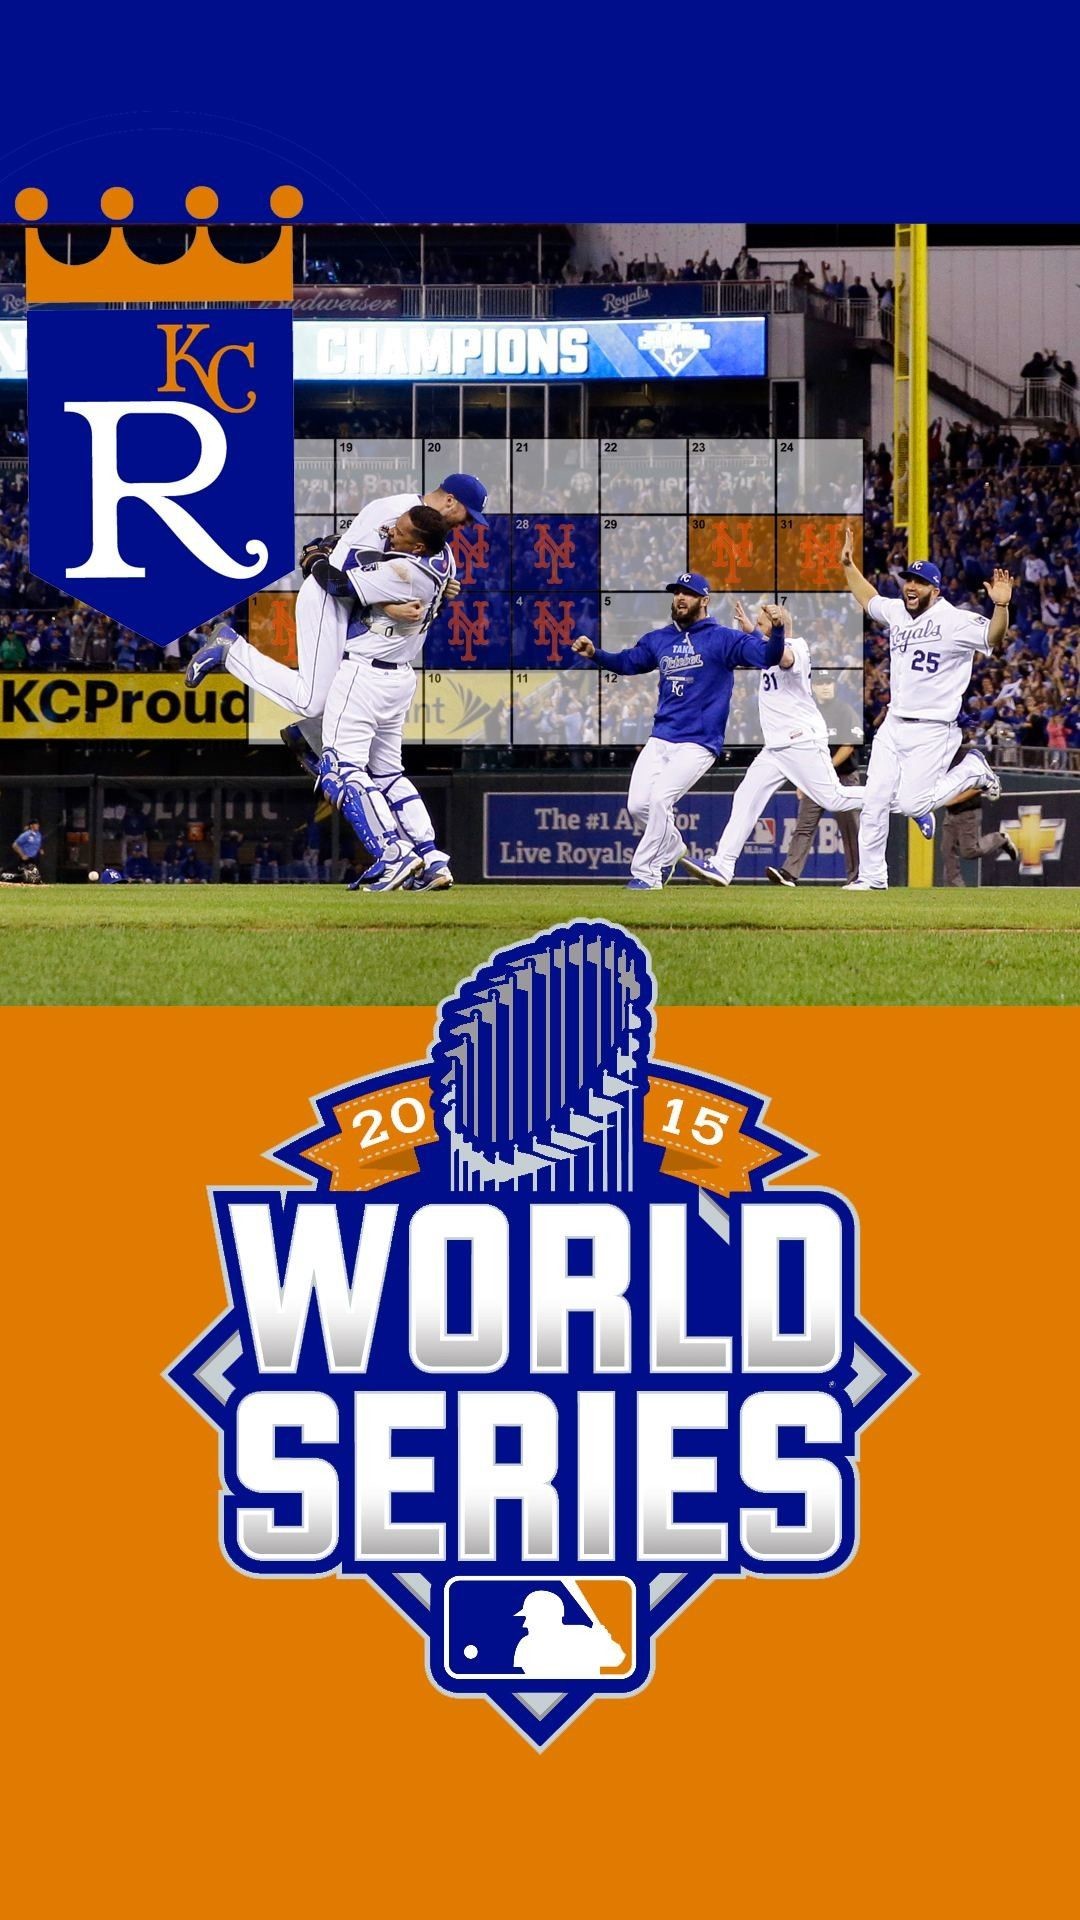 1080x1920 iPhone X Wallpaper Baseball New Kc Royals Wallpaper for iPhone 64 Images